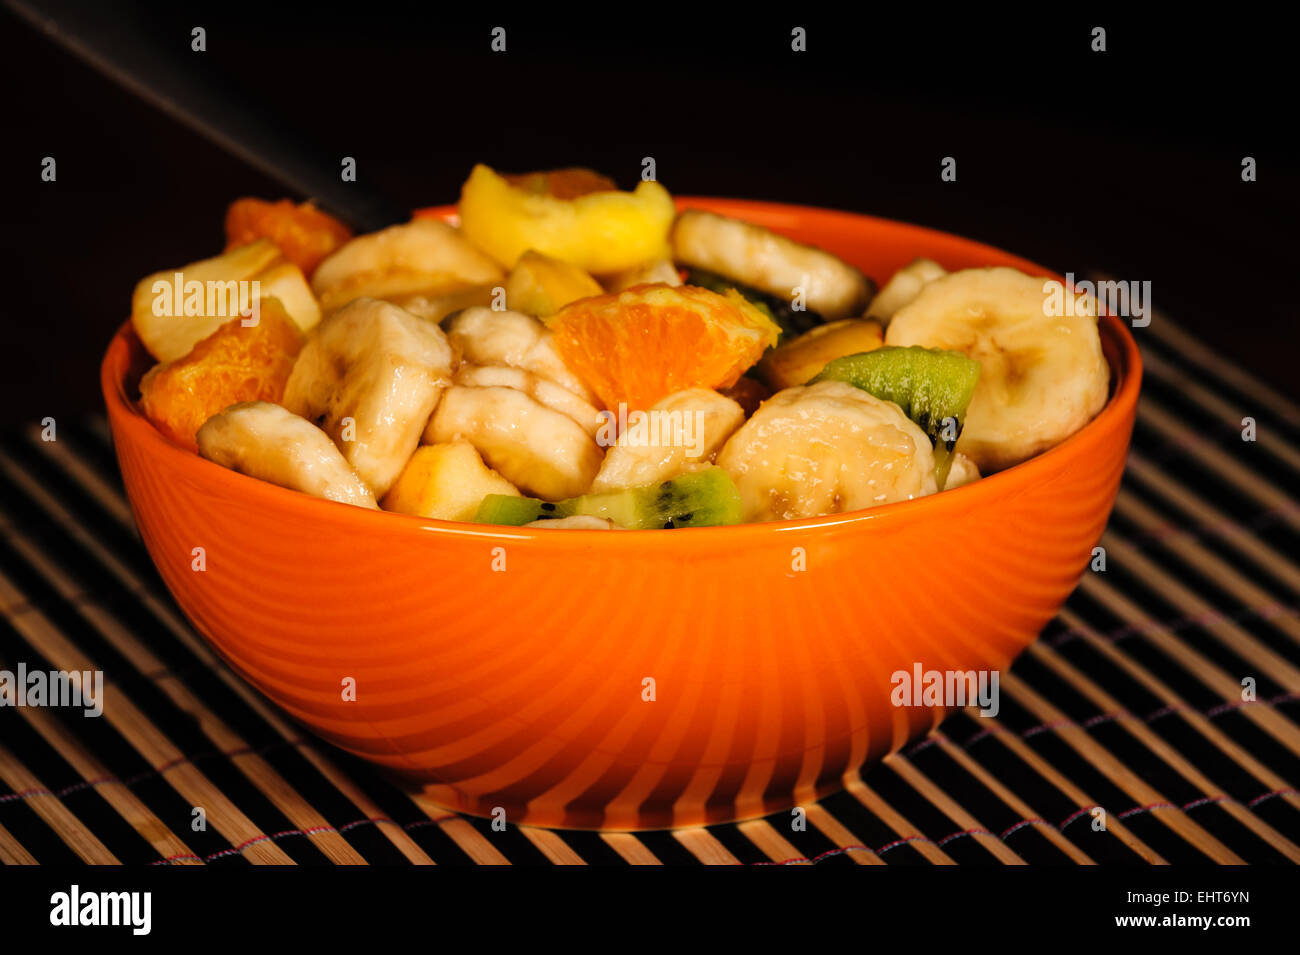 Mixed fruit salad, orange bowl, fresh healthy diet. Still life with black background. Stock Photo